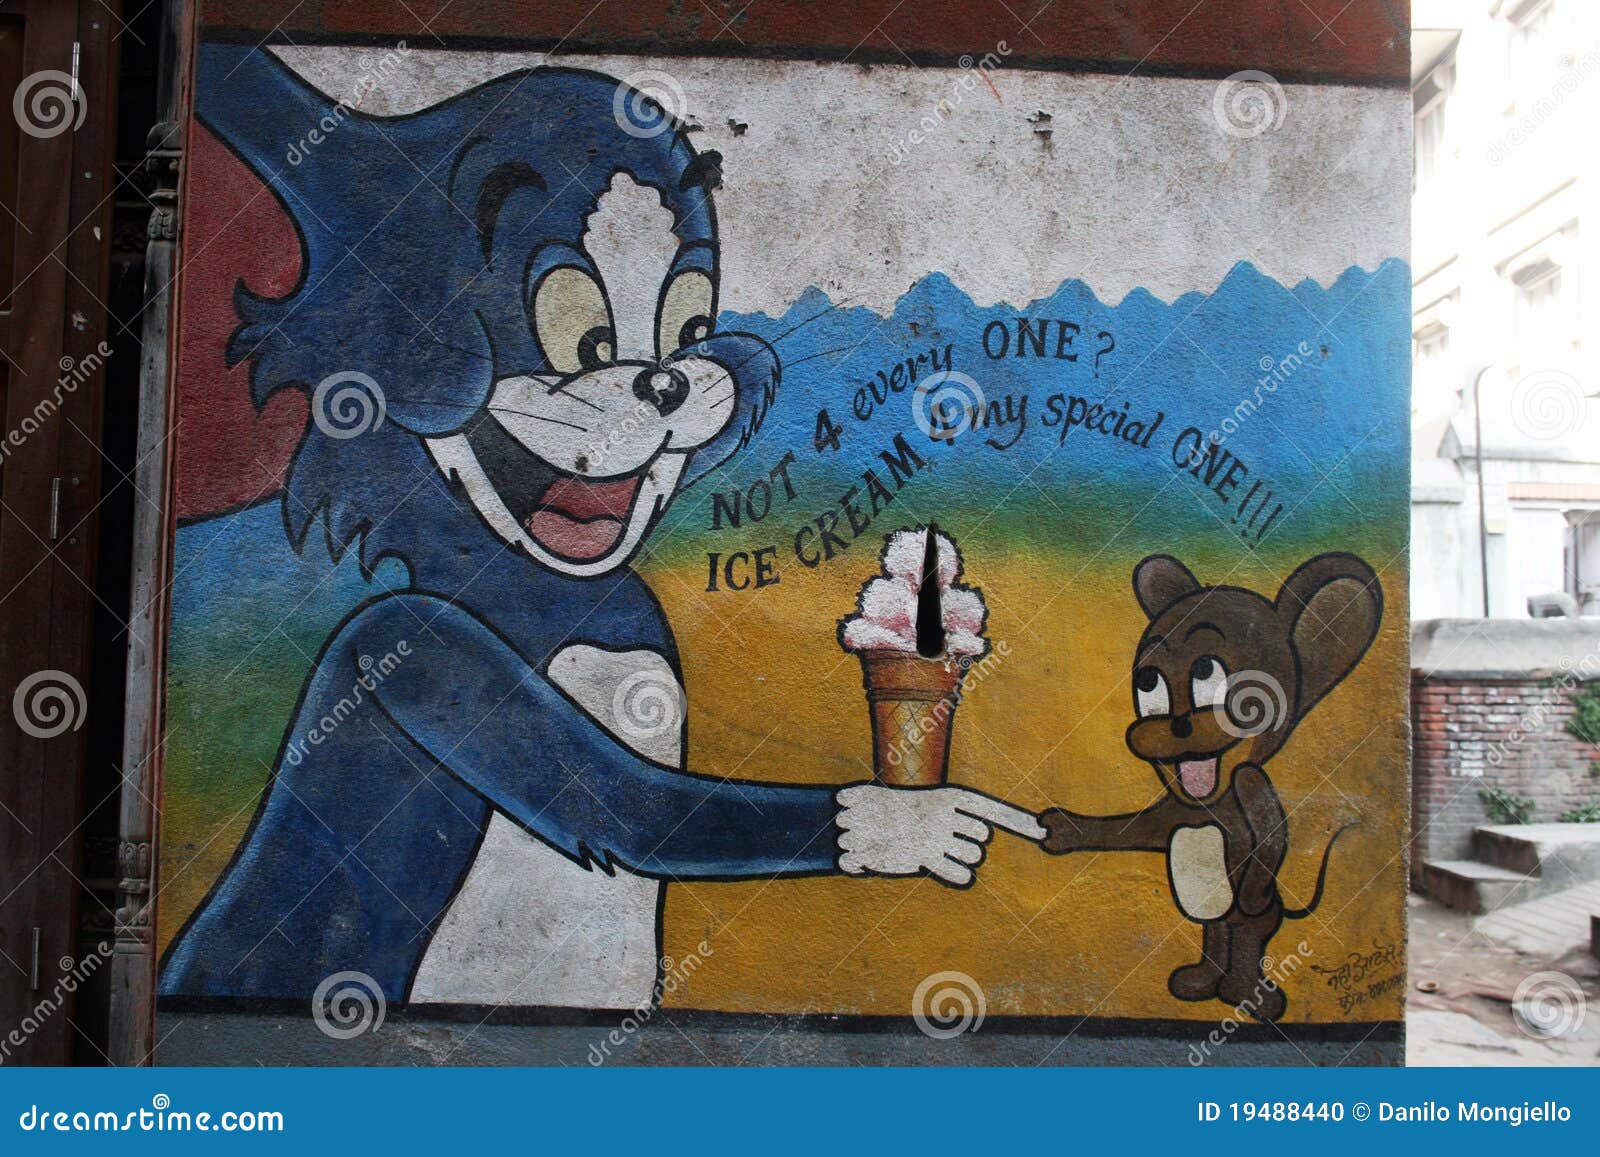 Tom And Jerry for Download: Unlimited Fun at Your Fingertips